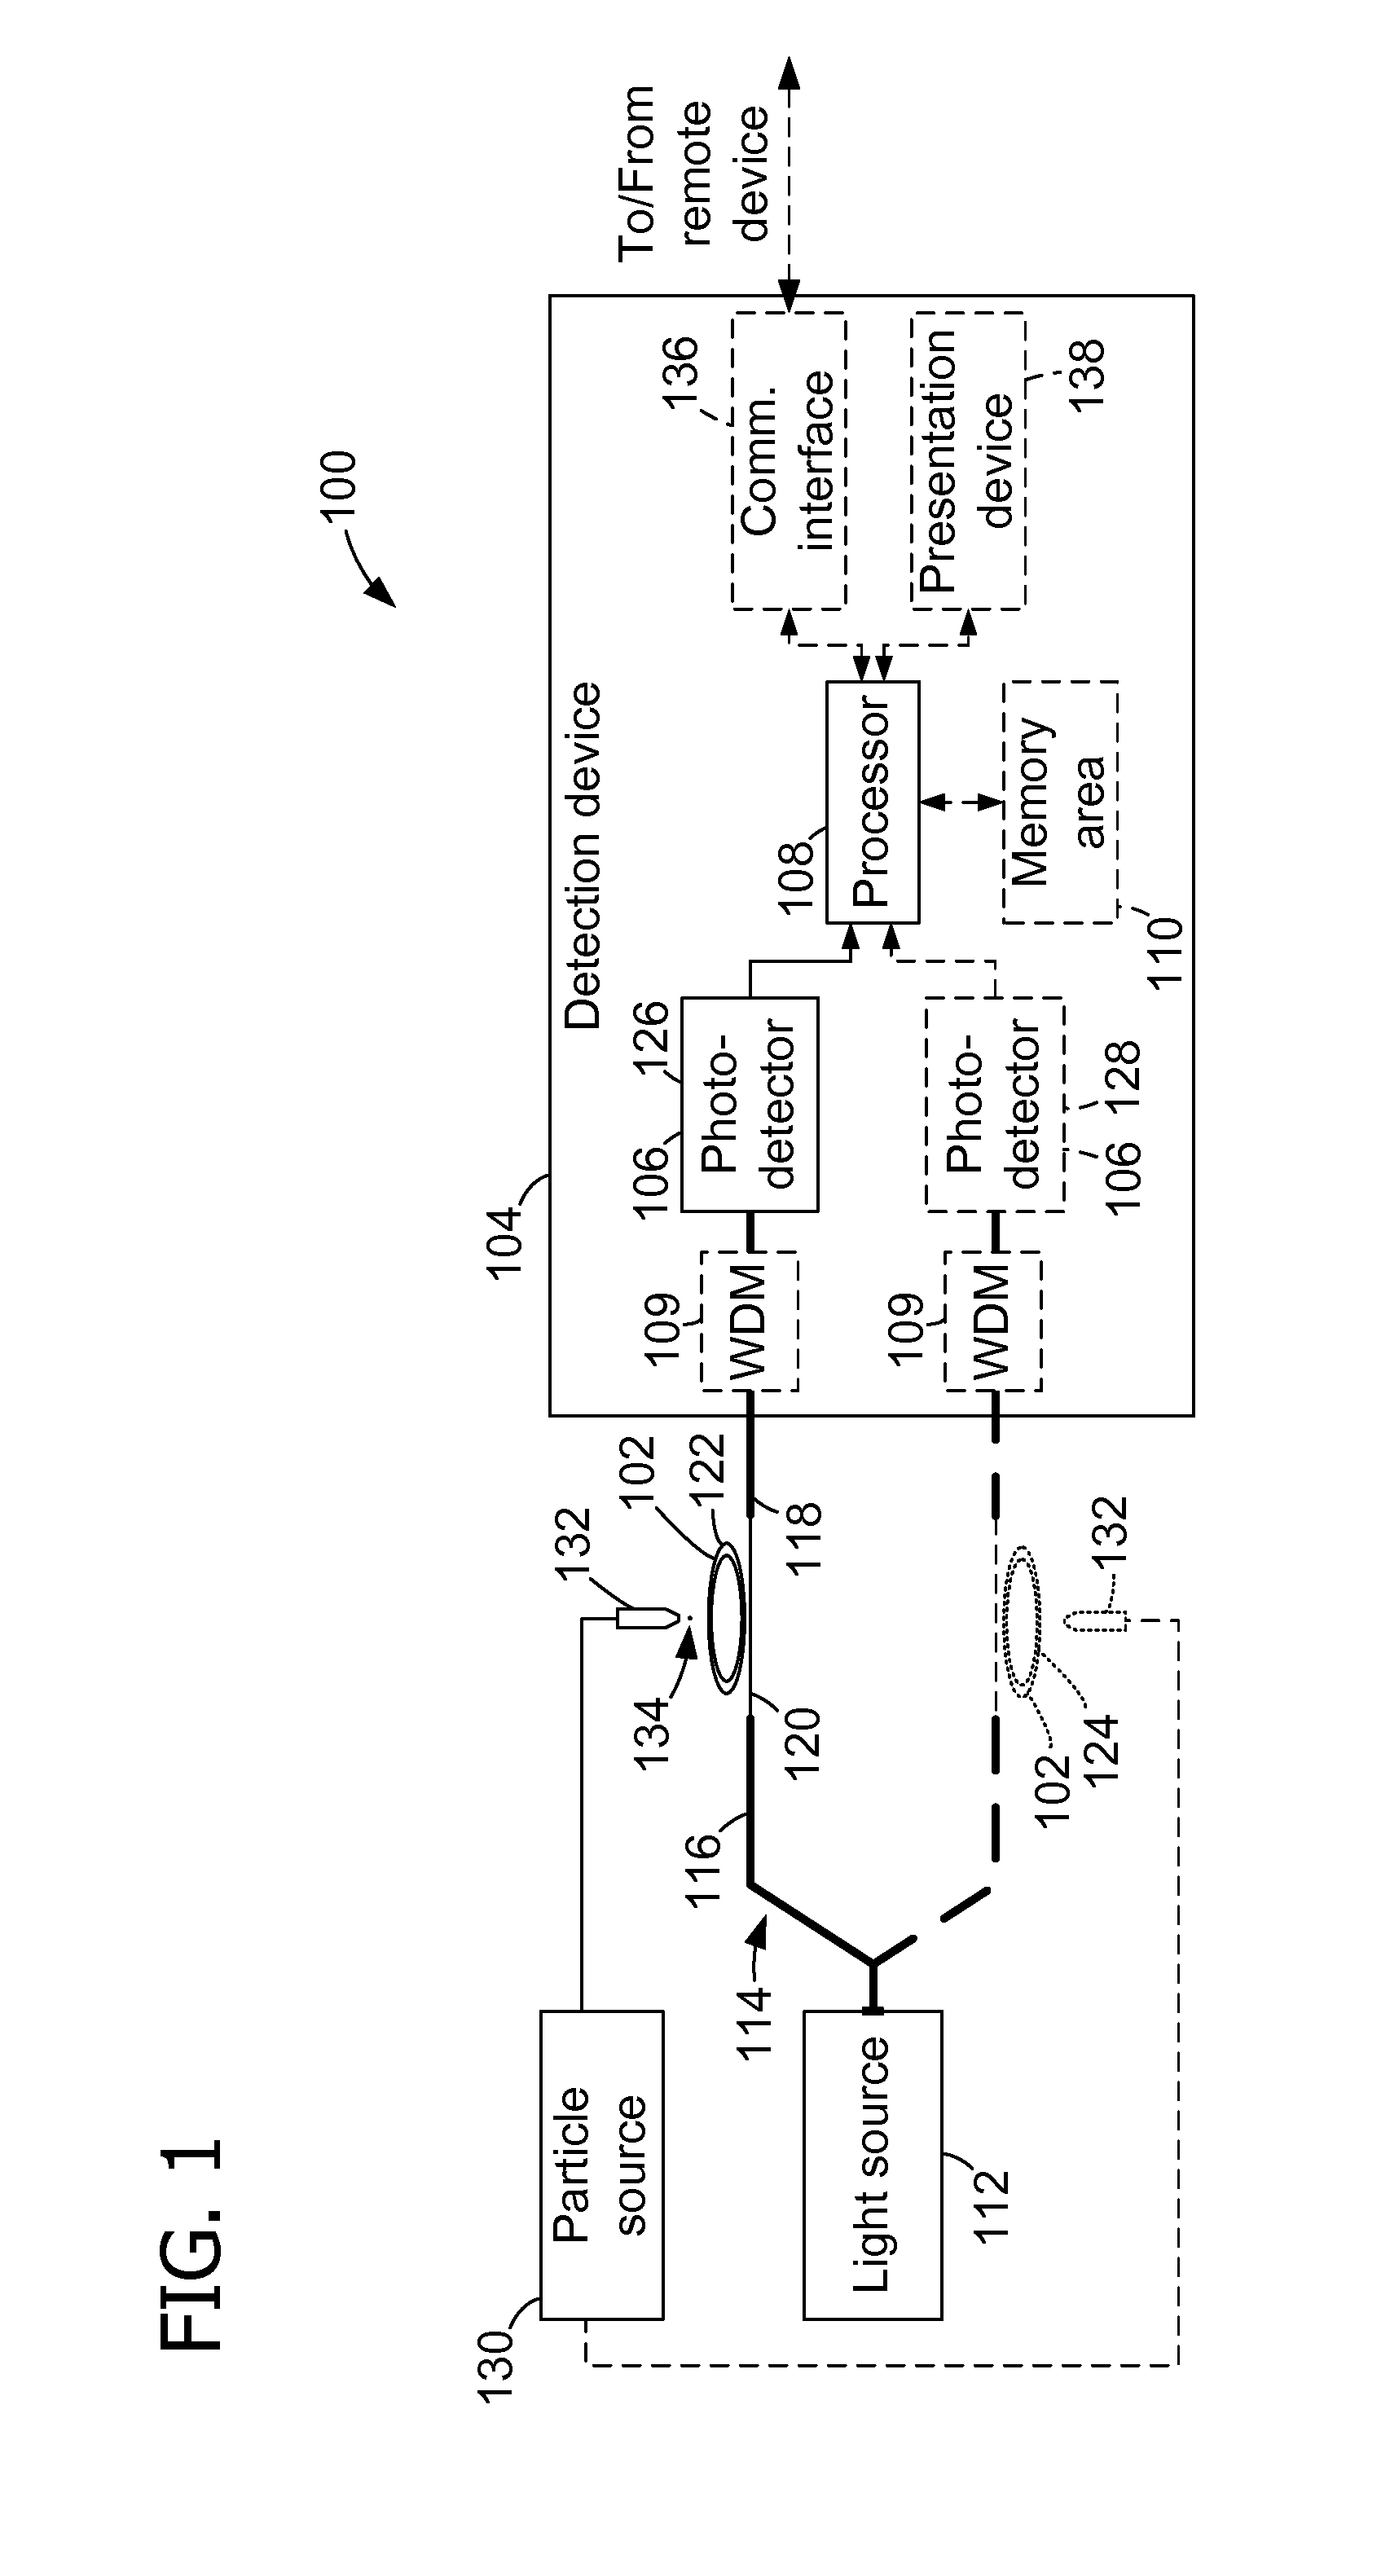 Systems and methods for particle detection